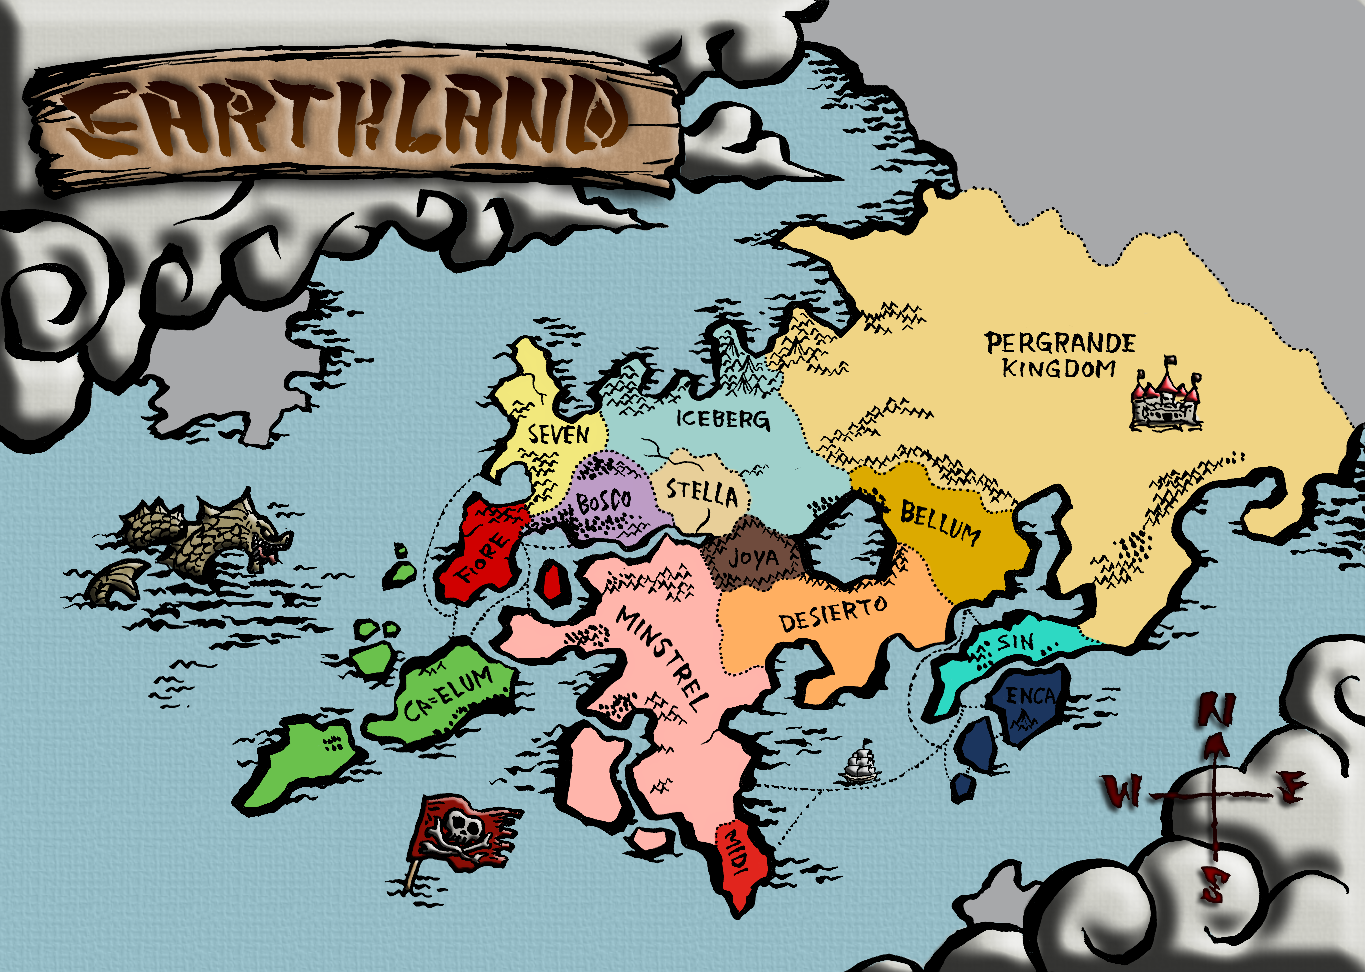 http://img2.wikia.nocookie.net/__cb20120628141651/fairytail/images/a/aa/Colored_Earth_Land_Map.png